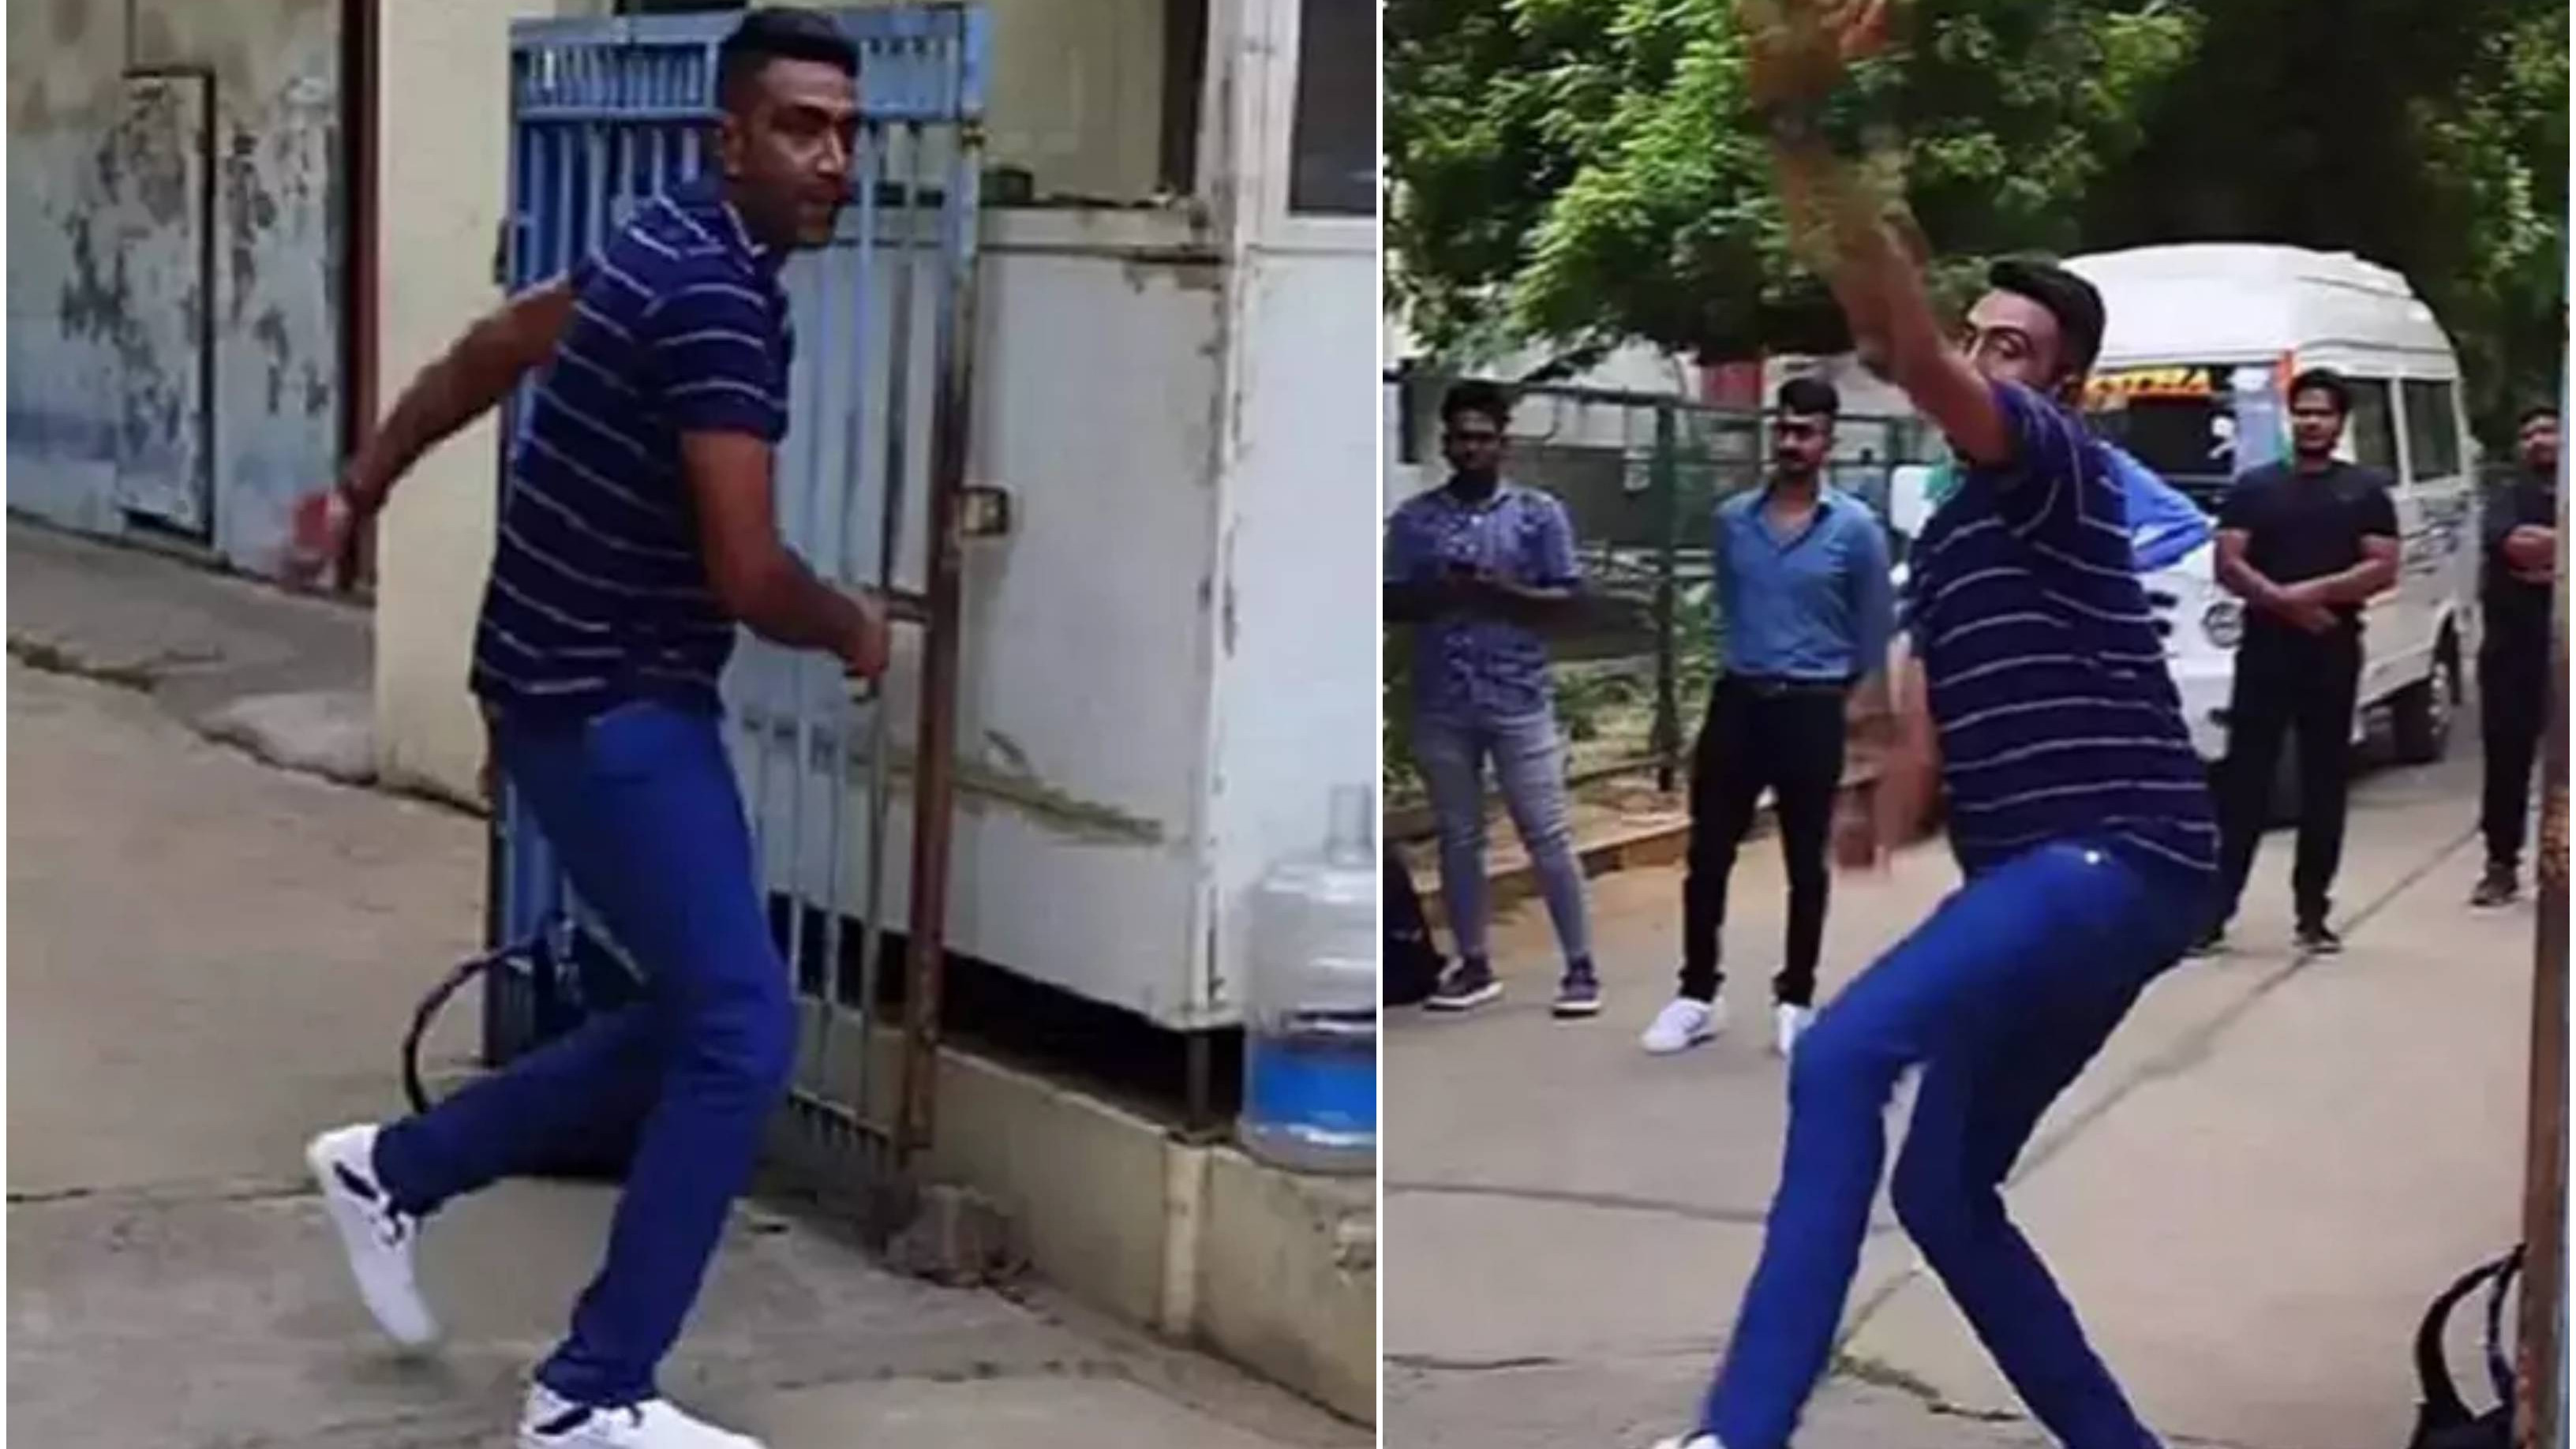 WATCH – R Ashwin plays gully cricket with youngsters; shares video on social media